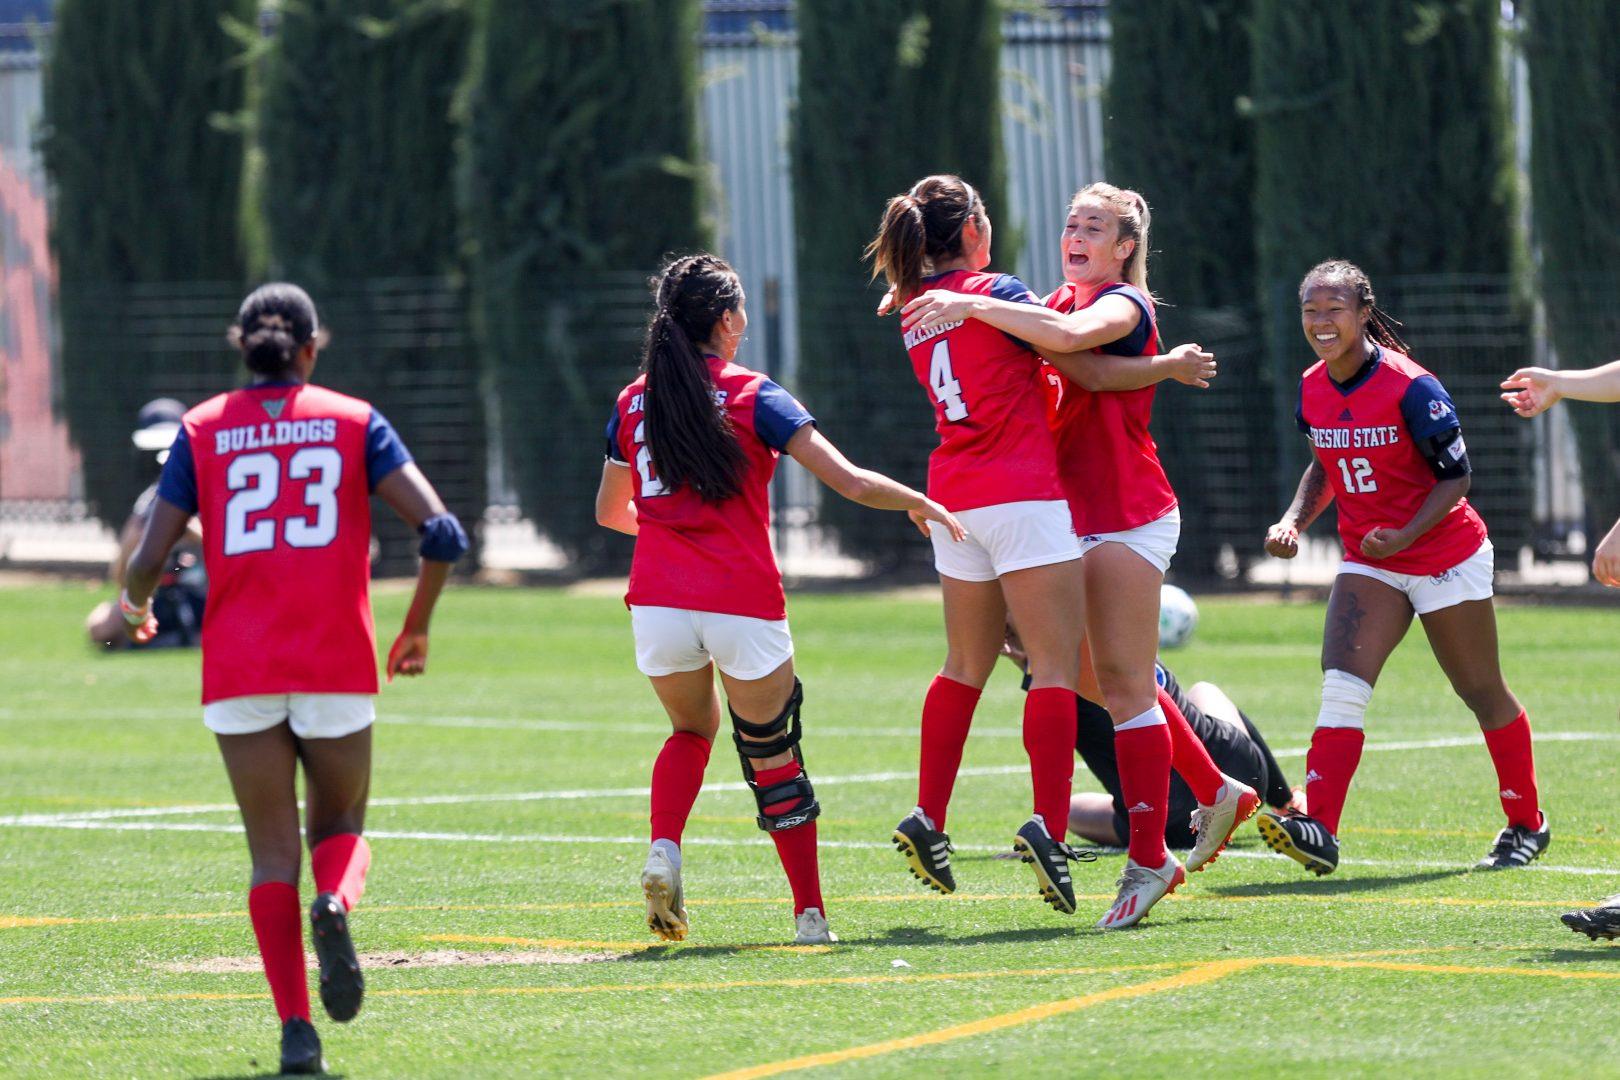 The Bulldogs celebrate their first goal made by midfielder/forward Katie Dohnel during the first half against San Jose State on Senior Day hosted at Fresno State on April 10, 2021 at the Soccer and Lacrosse Stadium. (Vendila Yang/The Collegian)